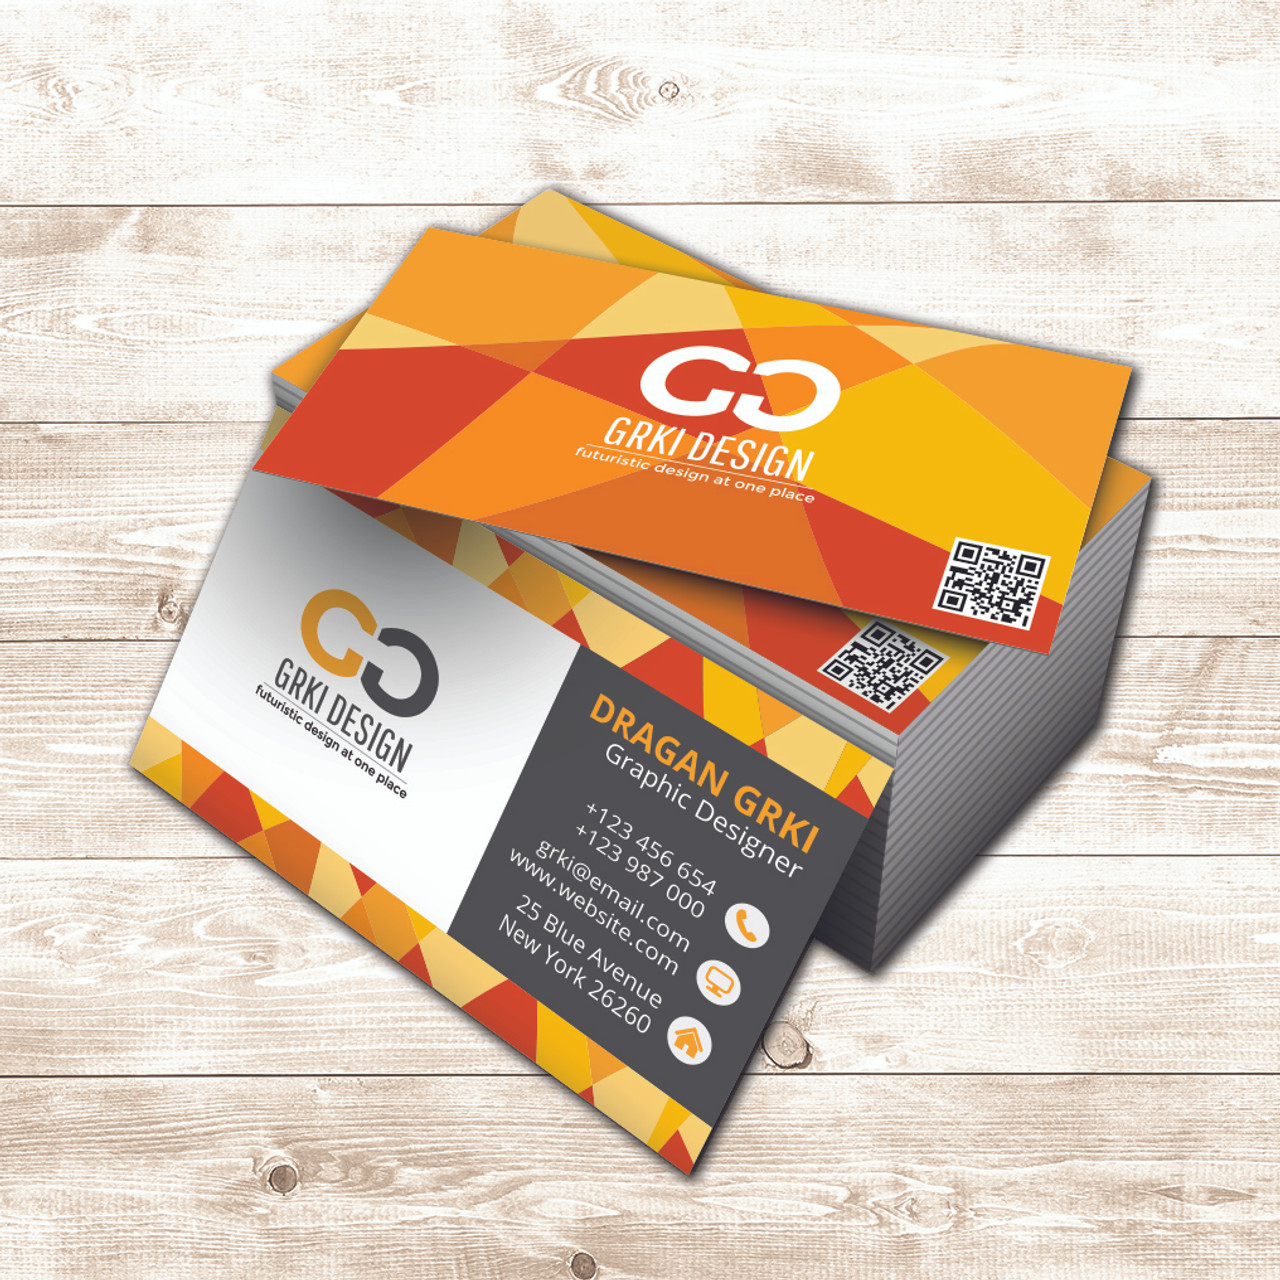 Print 2 x 3.5 Business Card Magnets - Full Color Printing Services, Signs and Banner Printing